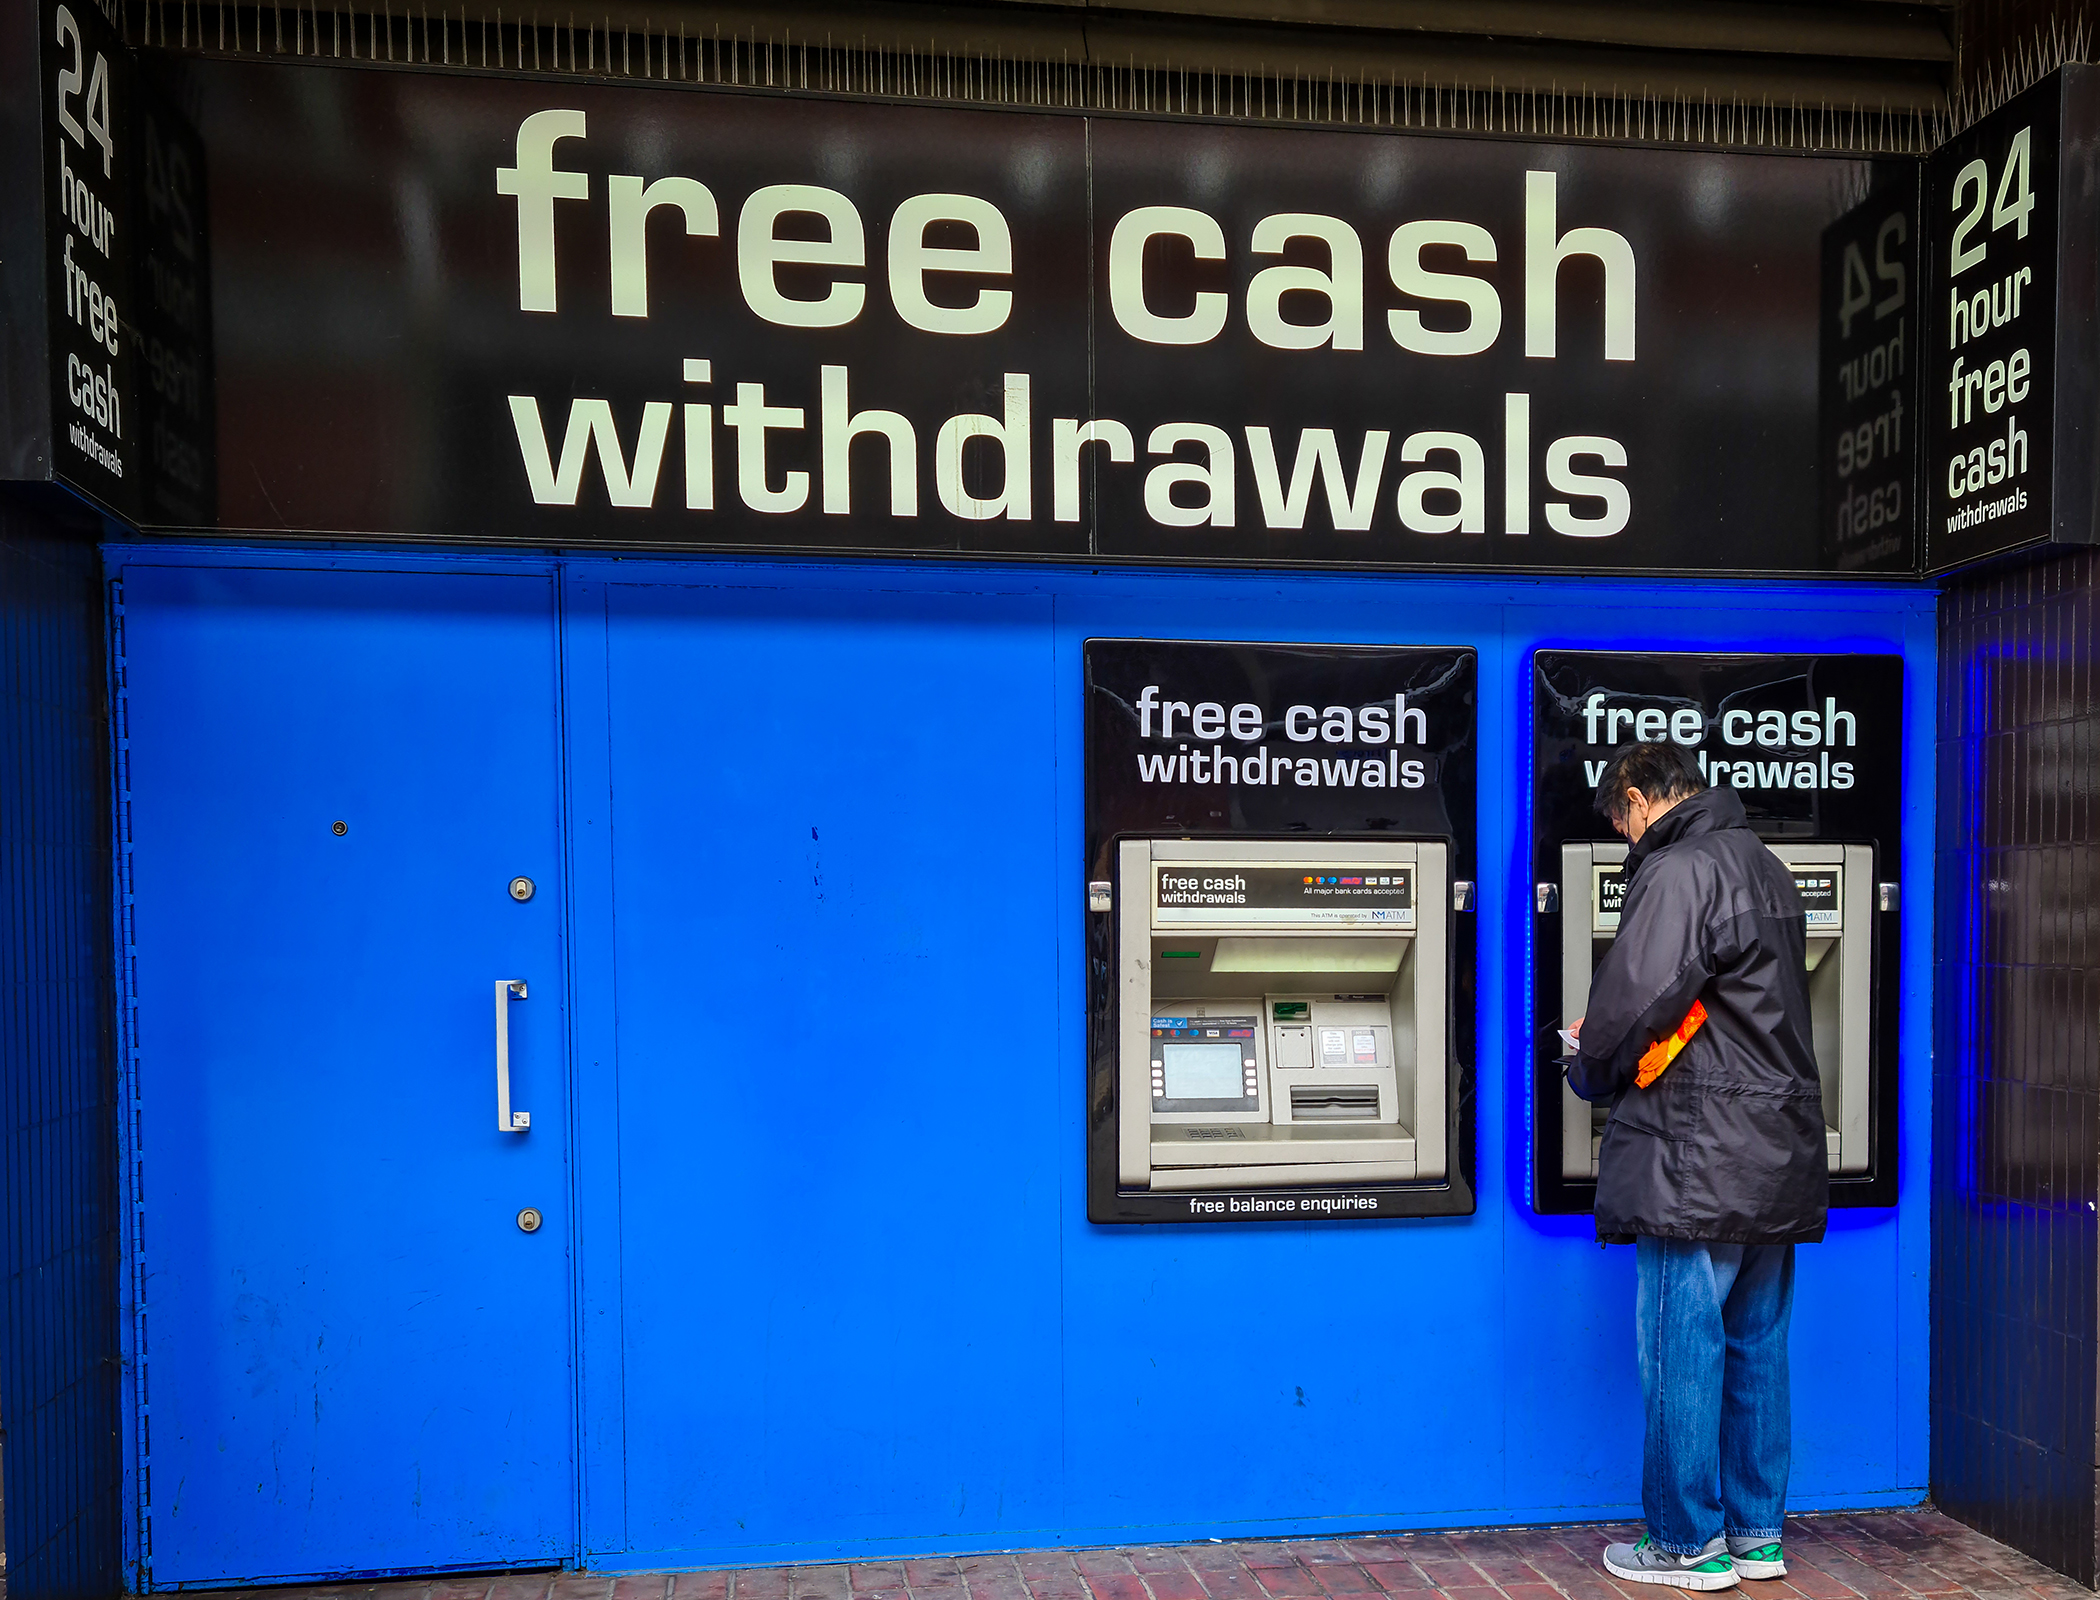 Banks to ensure access to cash within three miles for all UK citizens under new rules